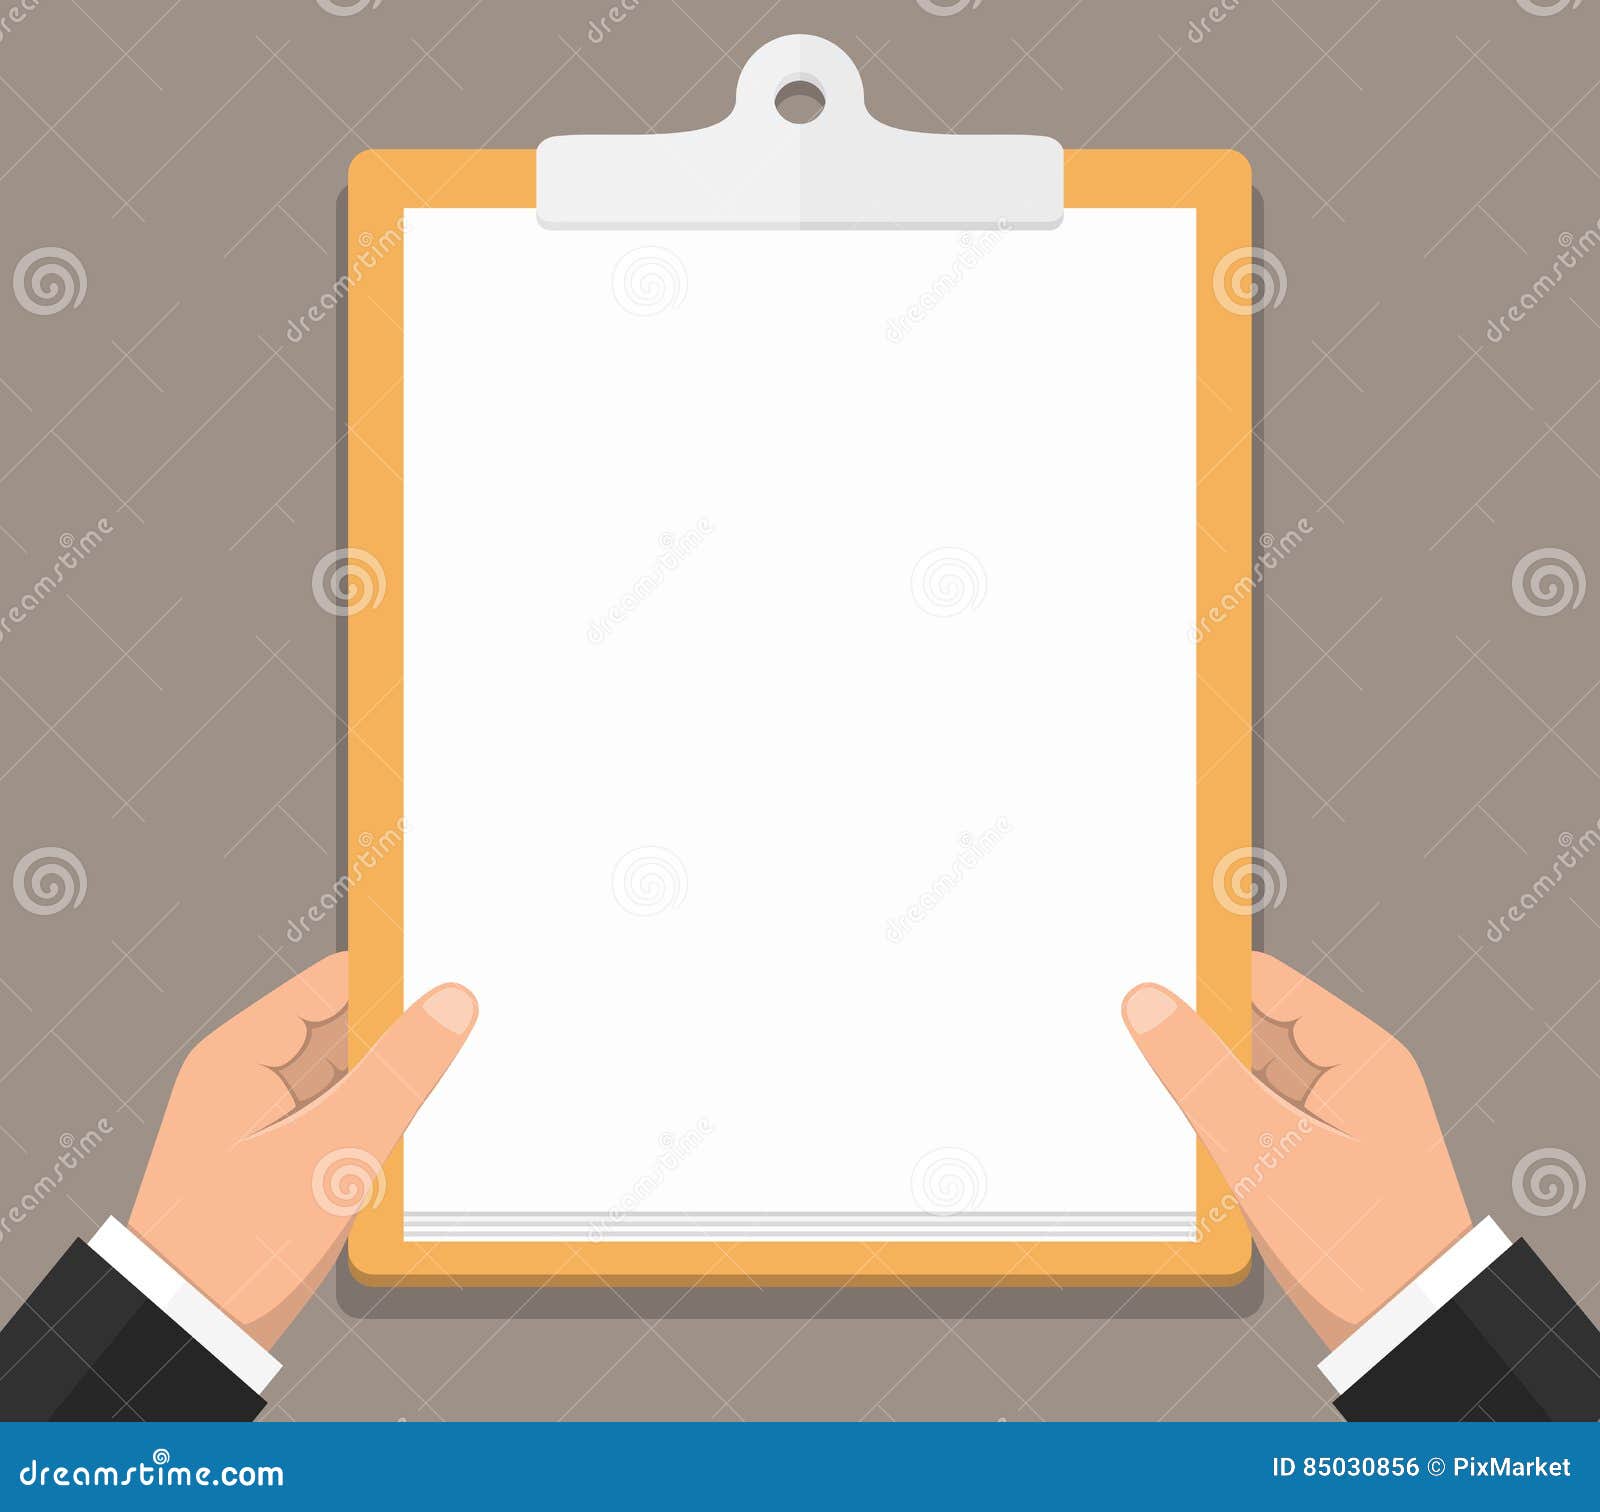 Hands with Clipboard stock vector. Illustration of hand - 85030856